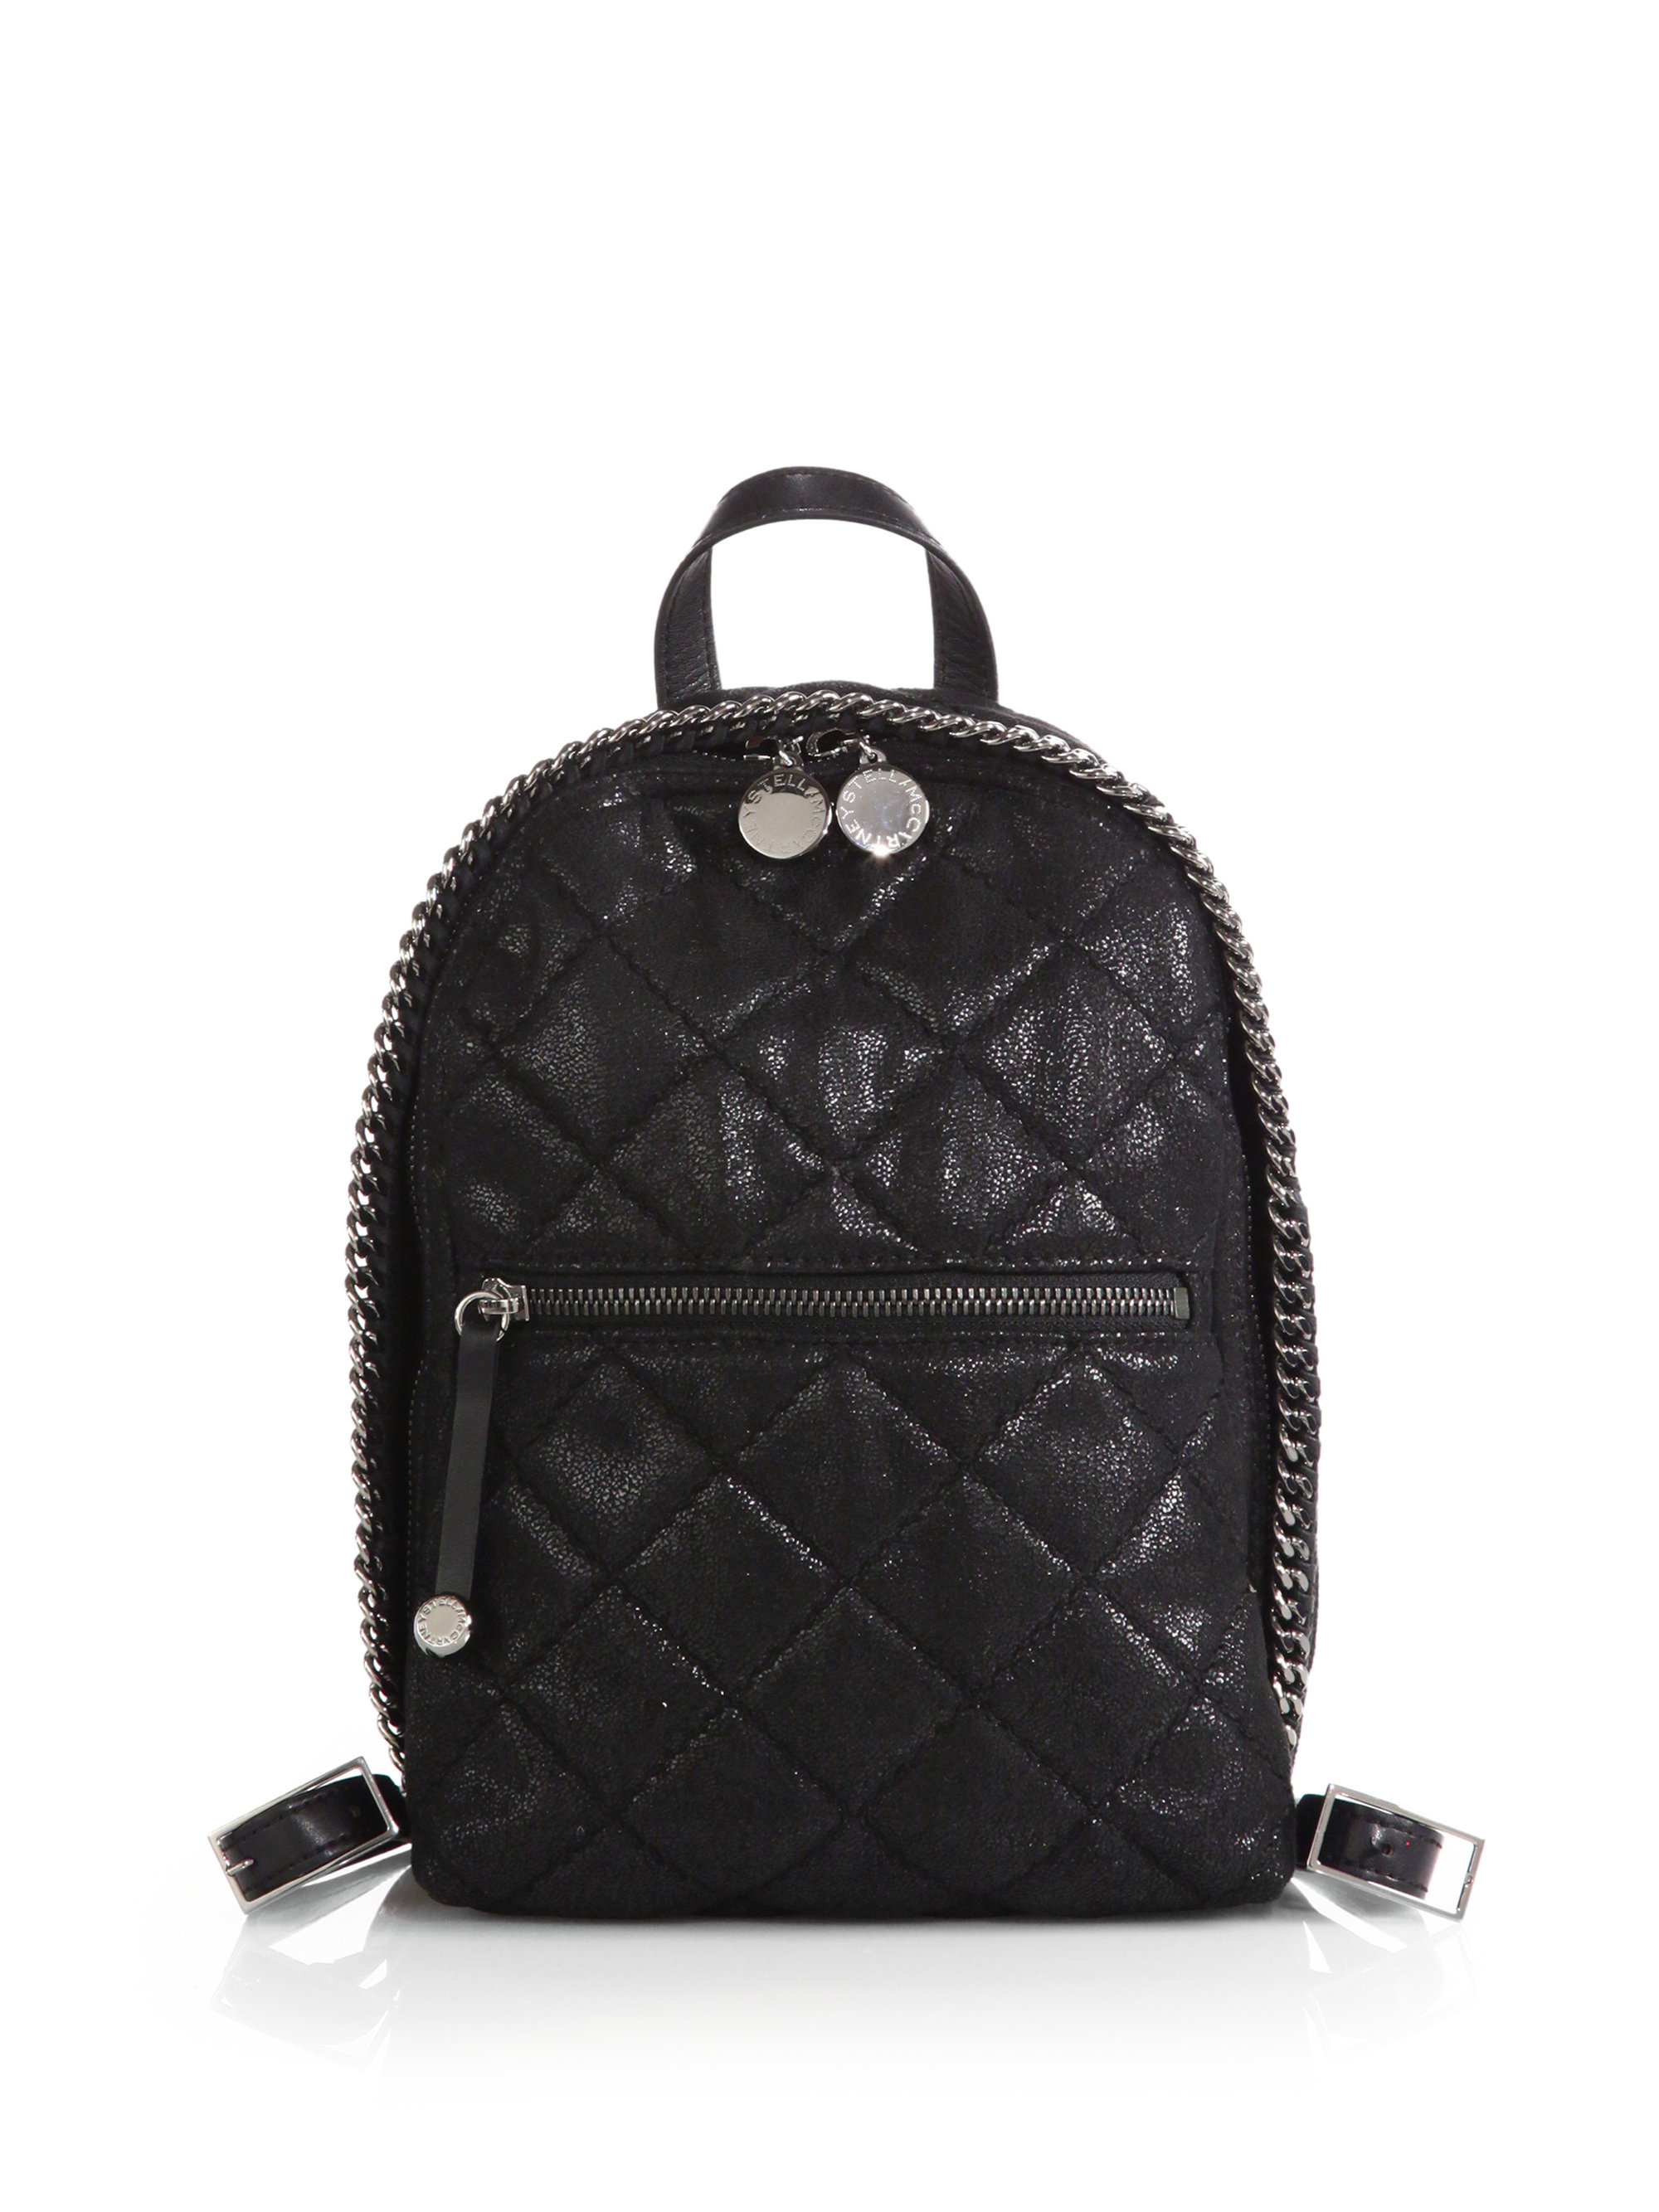 Stella Mccartney Quilted Faux-Leather Mini Backpack in Black | Lyst